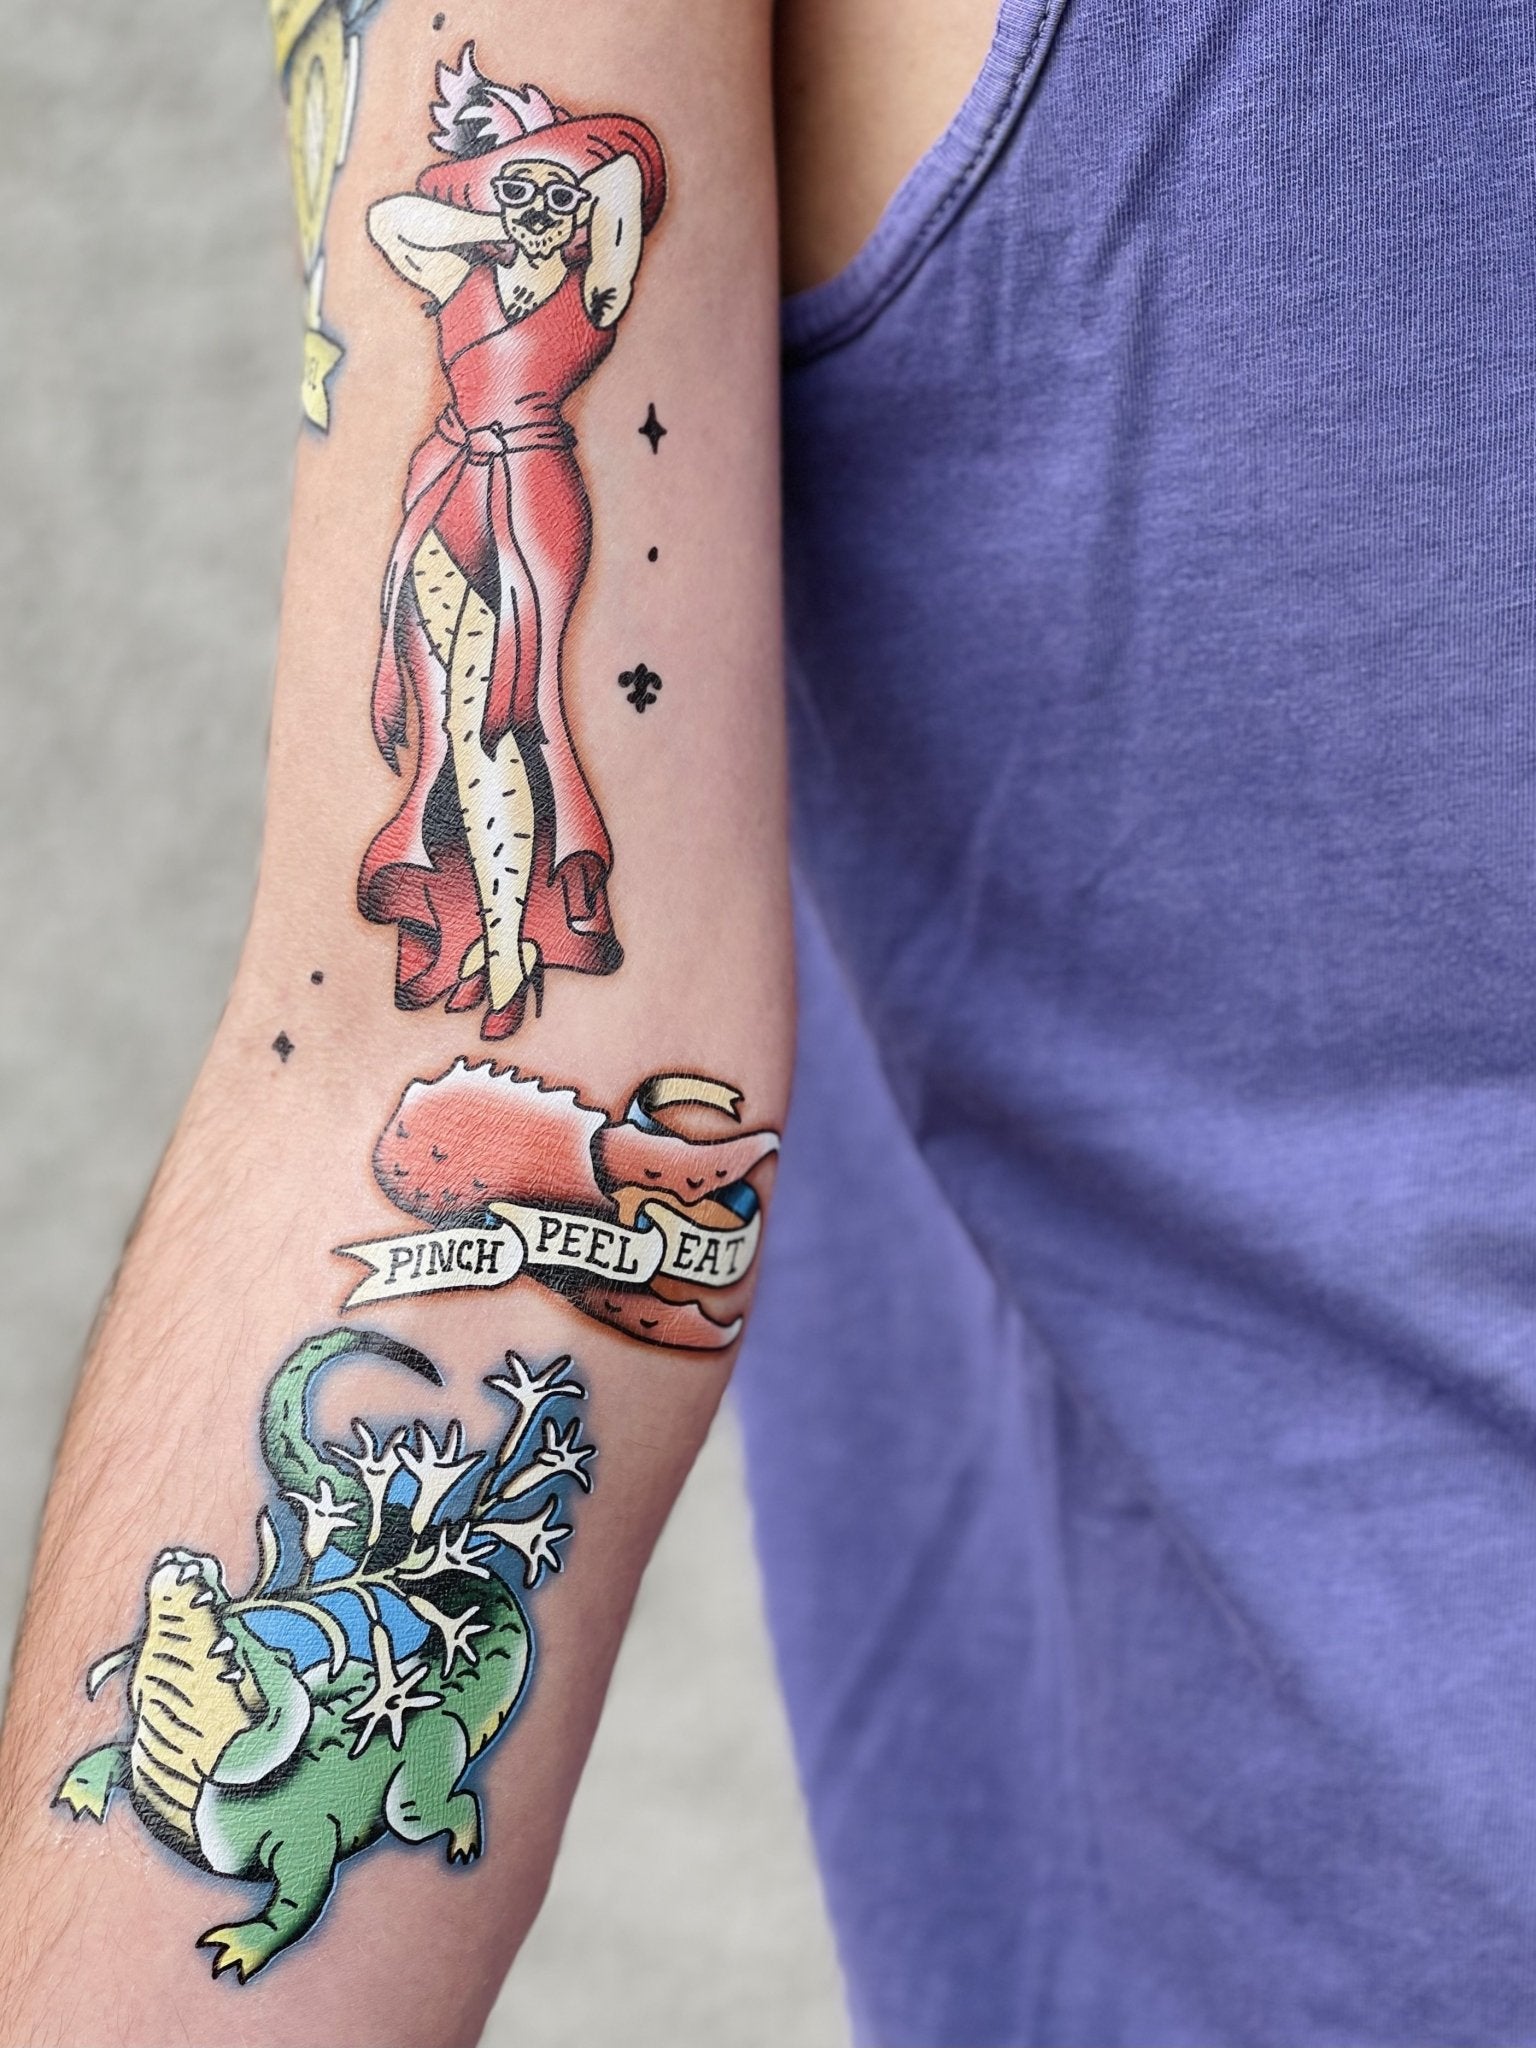 Disney tops the list of most tattooed brands in the world